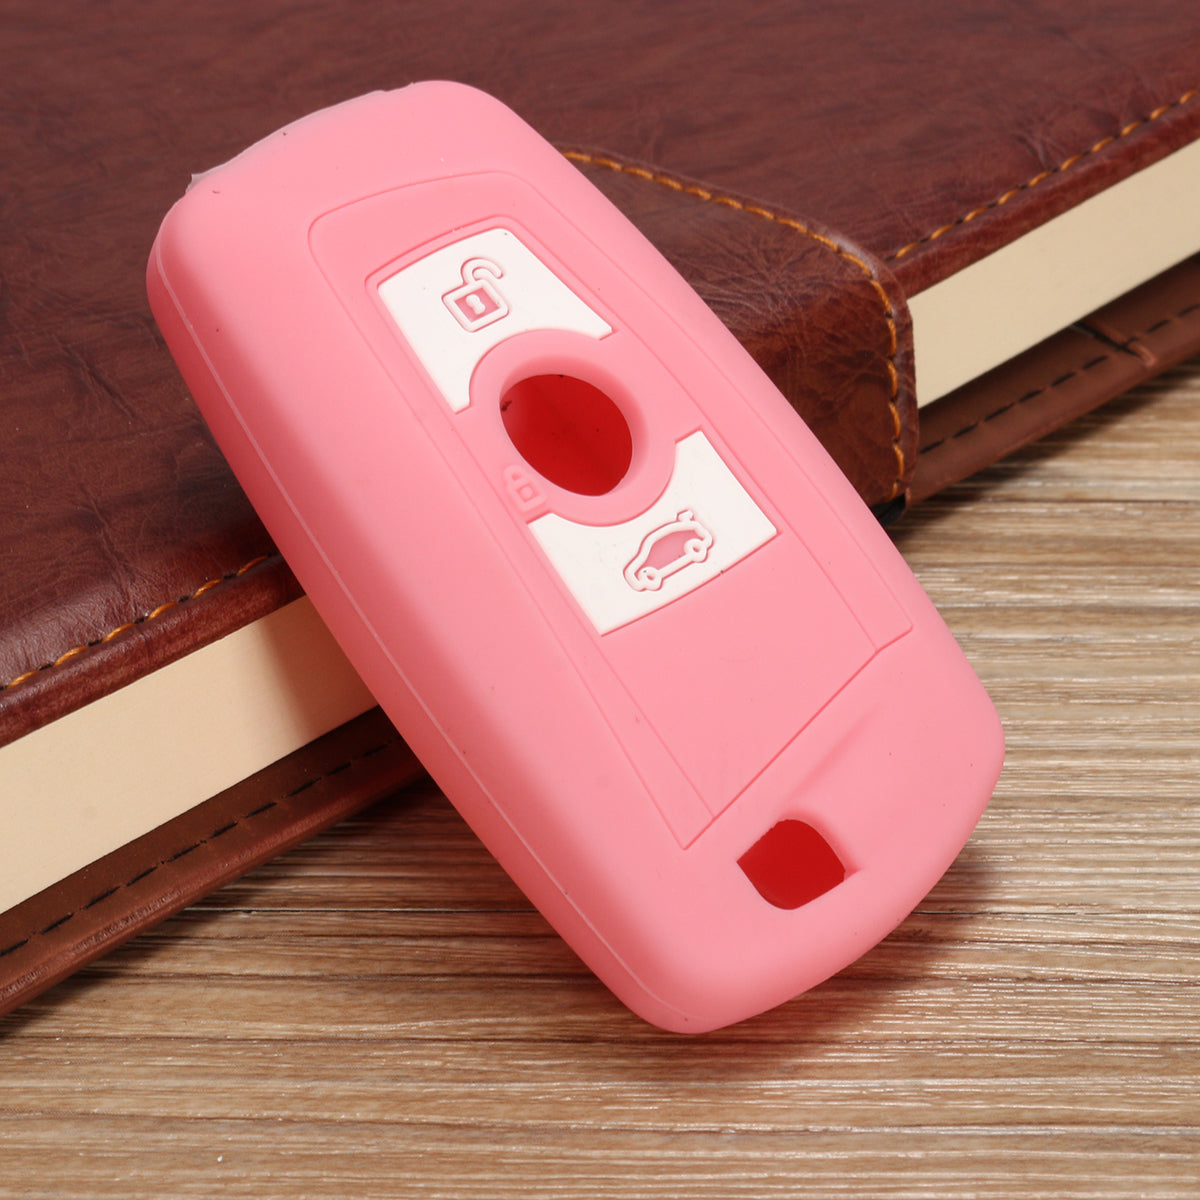 Light Pink 2 Button Silicone Fob Remote Key Case Shell For BMW 1 2 3 5 7 Series F10 F20